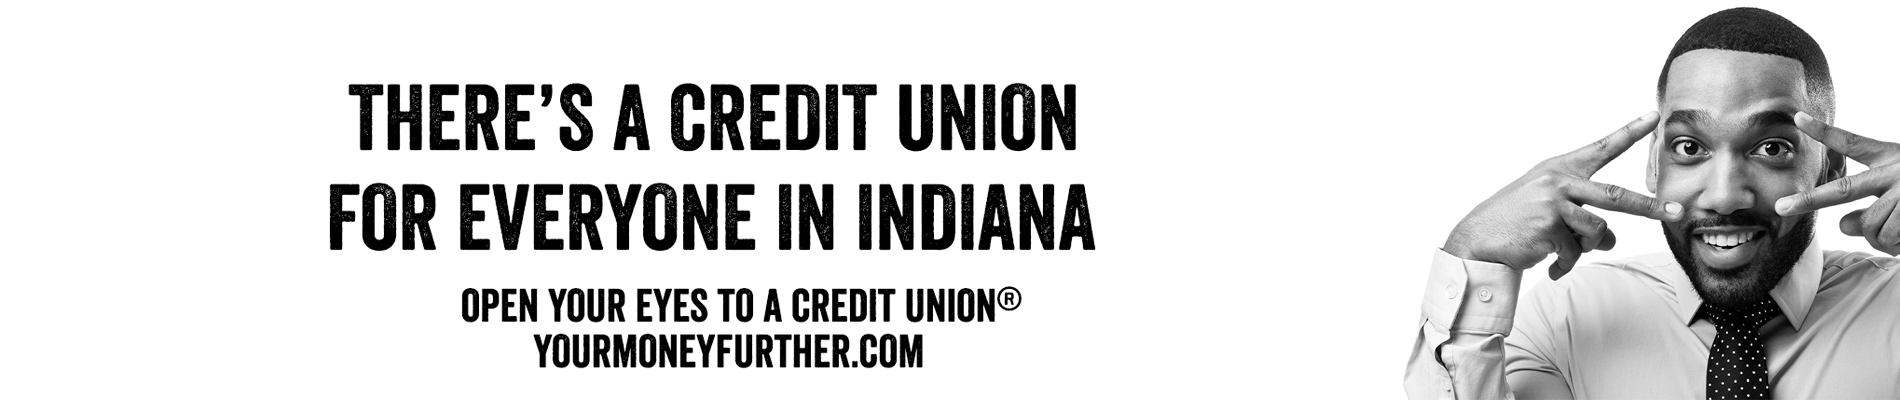 OYE-Credit-union-for-everyone-in-Indiana_black-man_1900x400